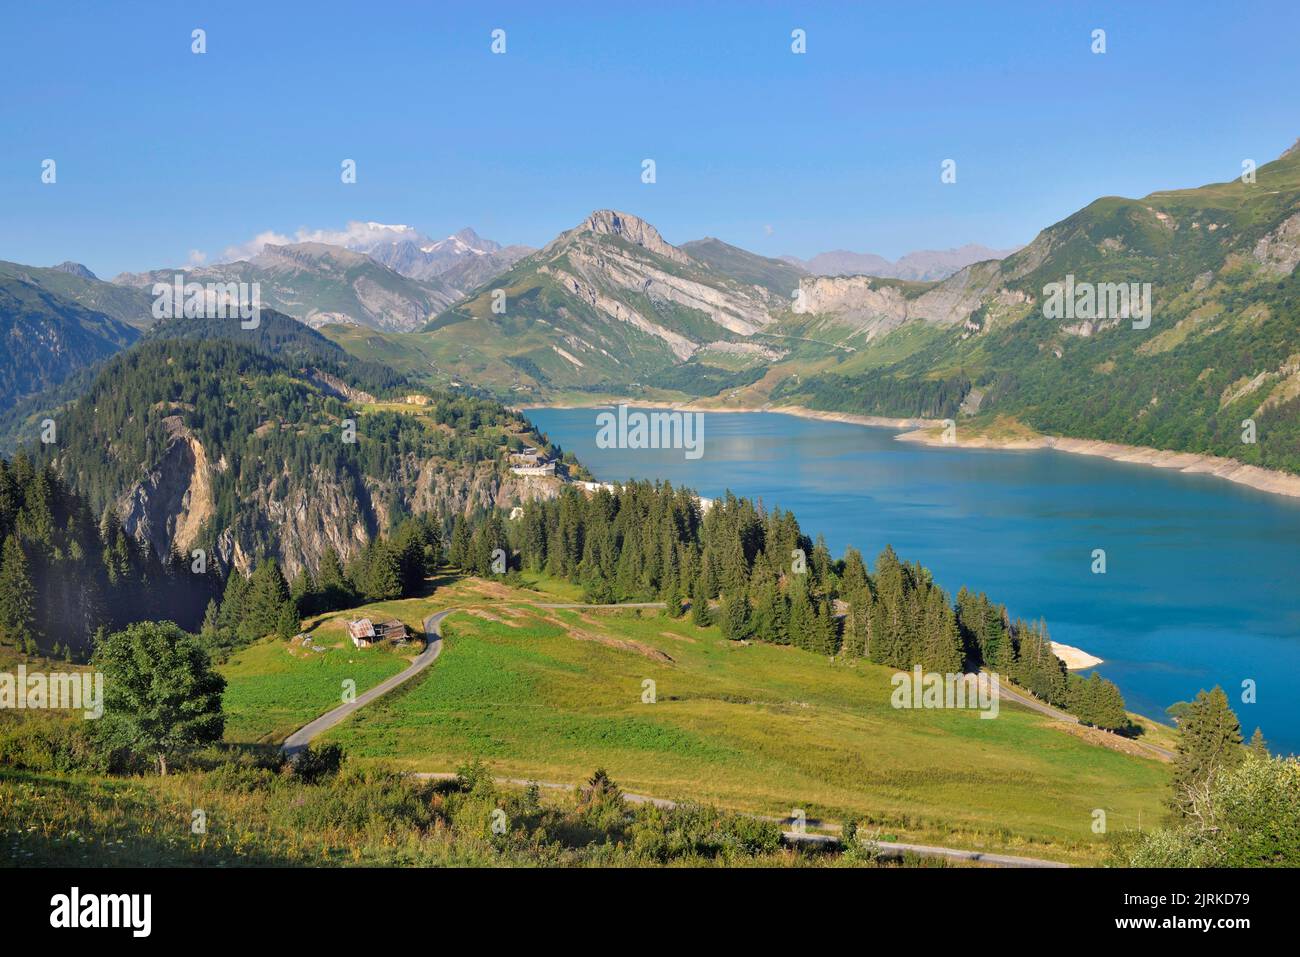 beautiful landscape with a lake and peak montain back and green meadow in the foreground in french Alps Stock Photo